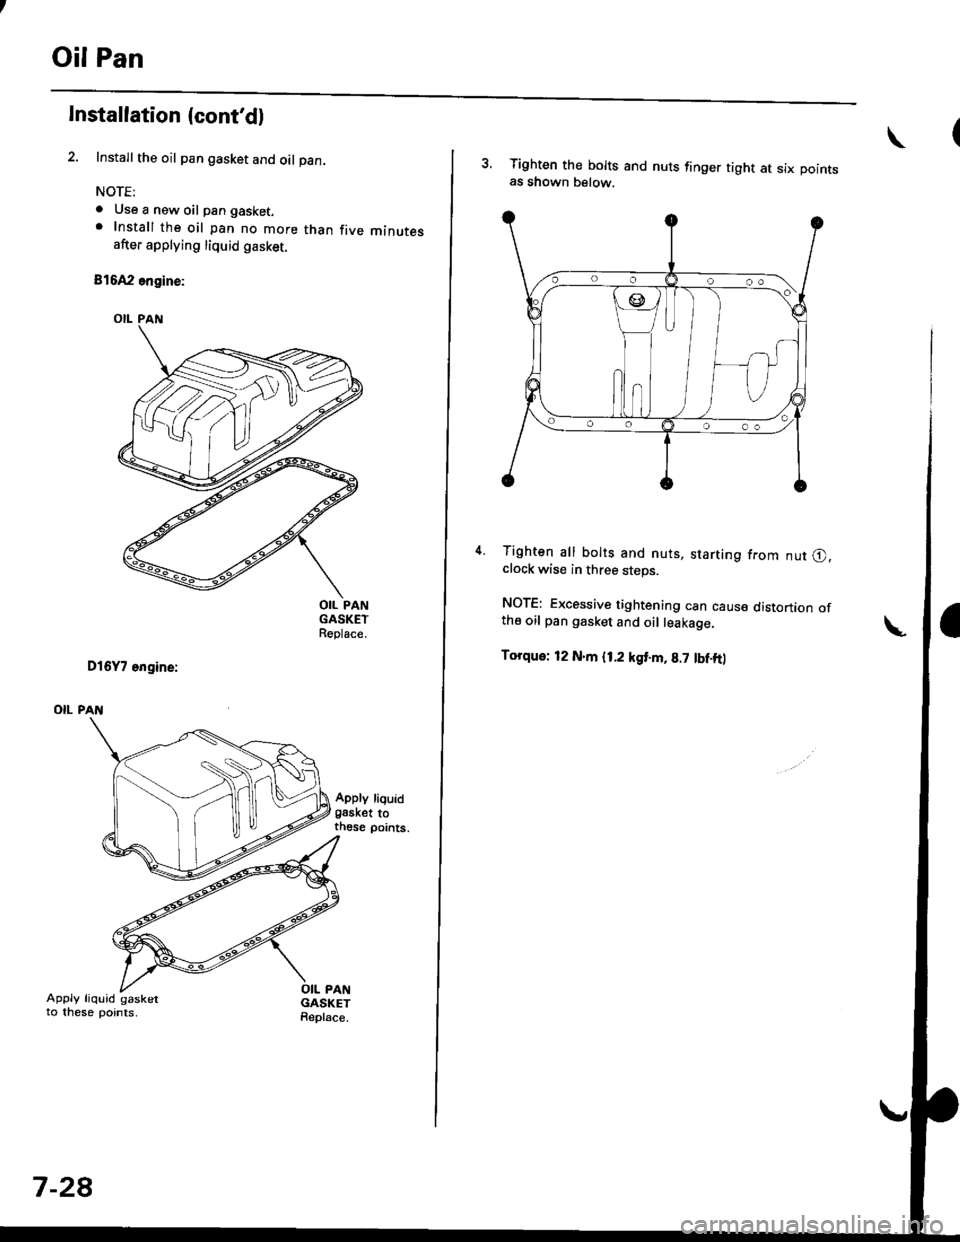 HONDA CIVIC 1997 6.G Owners Manual Oil Pan
lnstallation (contdl
Install the oil pan gasket and oil pan
NOTE:
a Use a new oil pan gasket.. Install the oil pan no more than five minutesafter applying liquid gasket.
816A2 engine:
OIL PAN